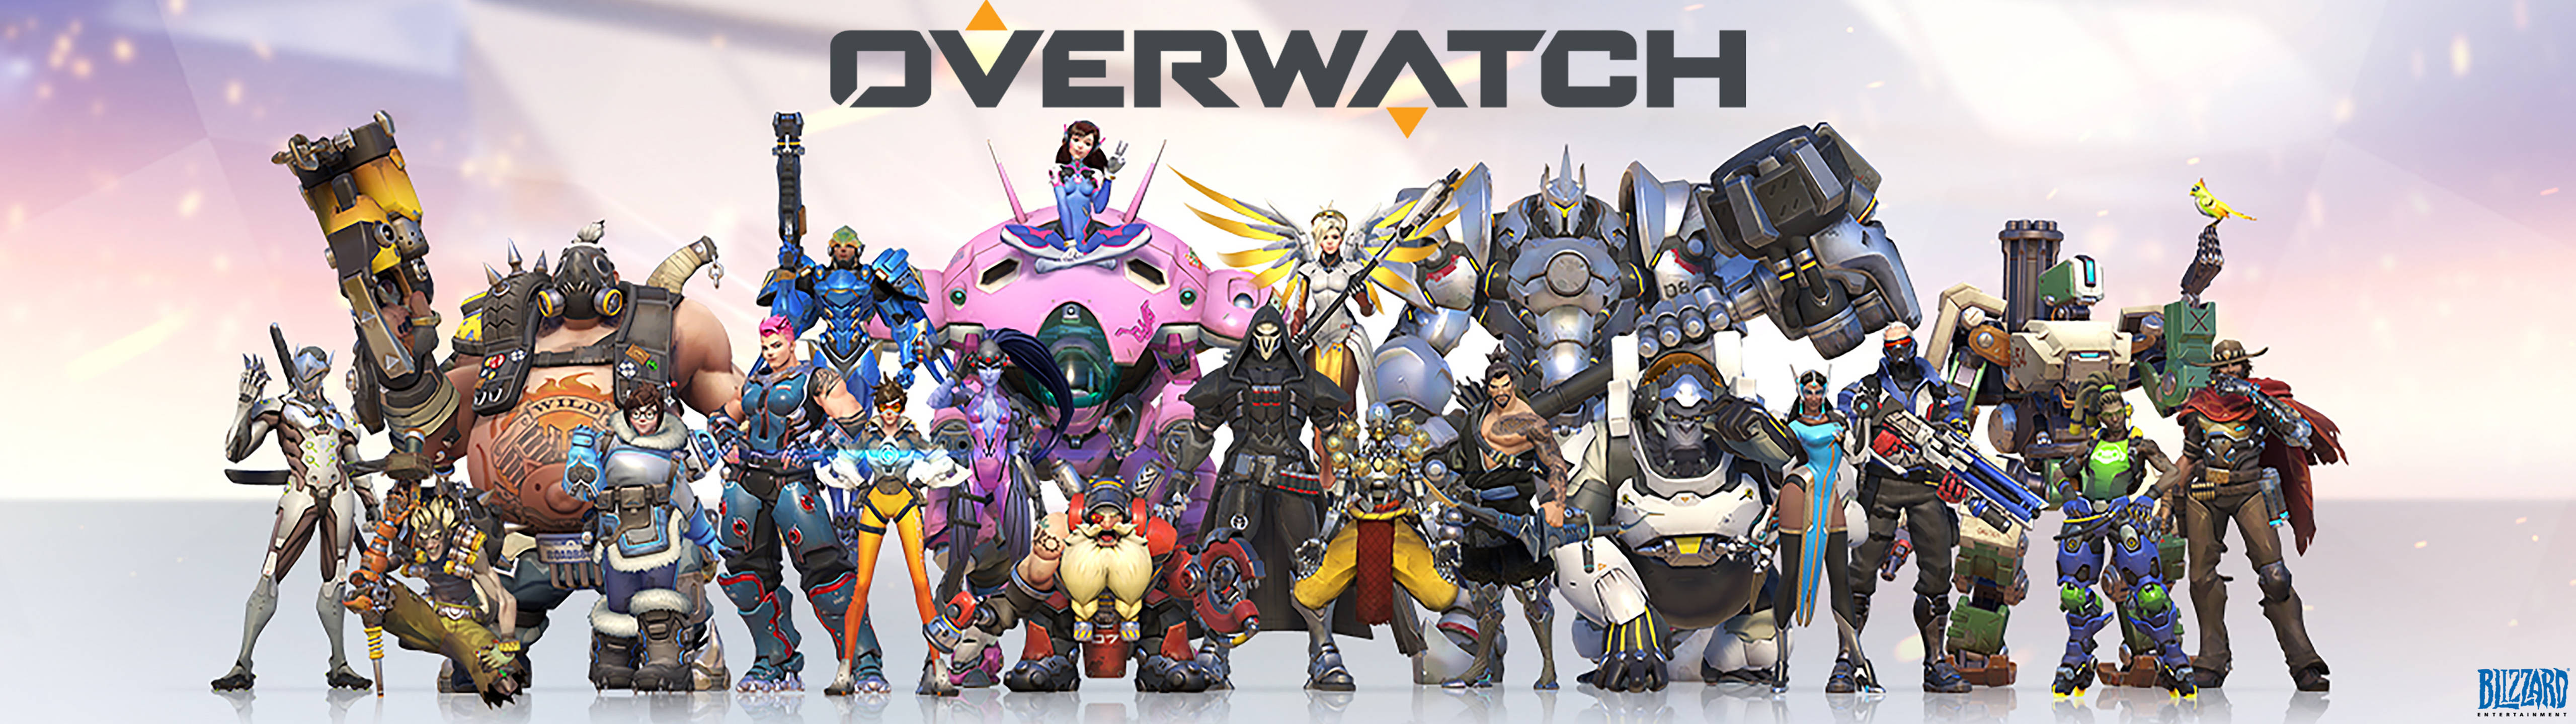 5120x1440 Game Overwatch Characters